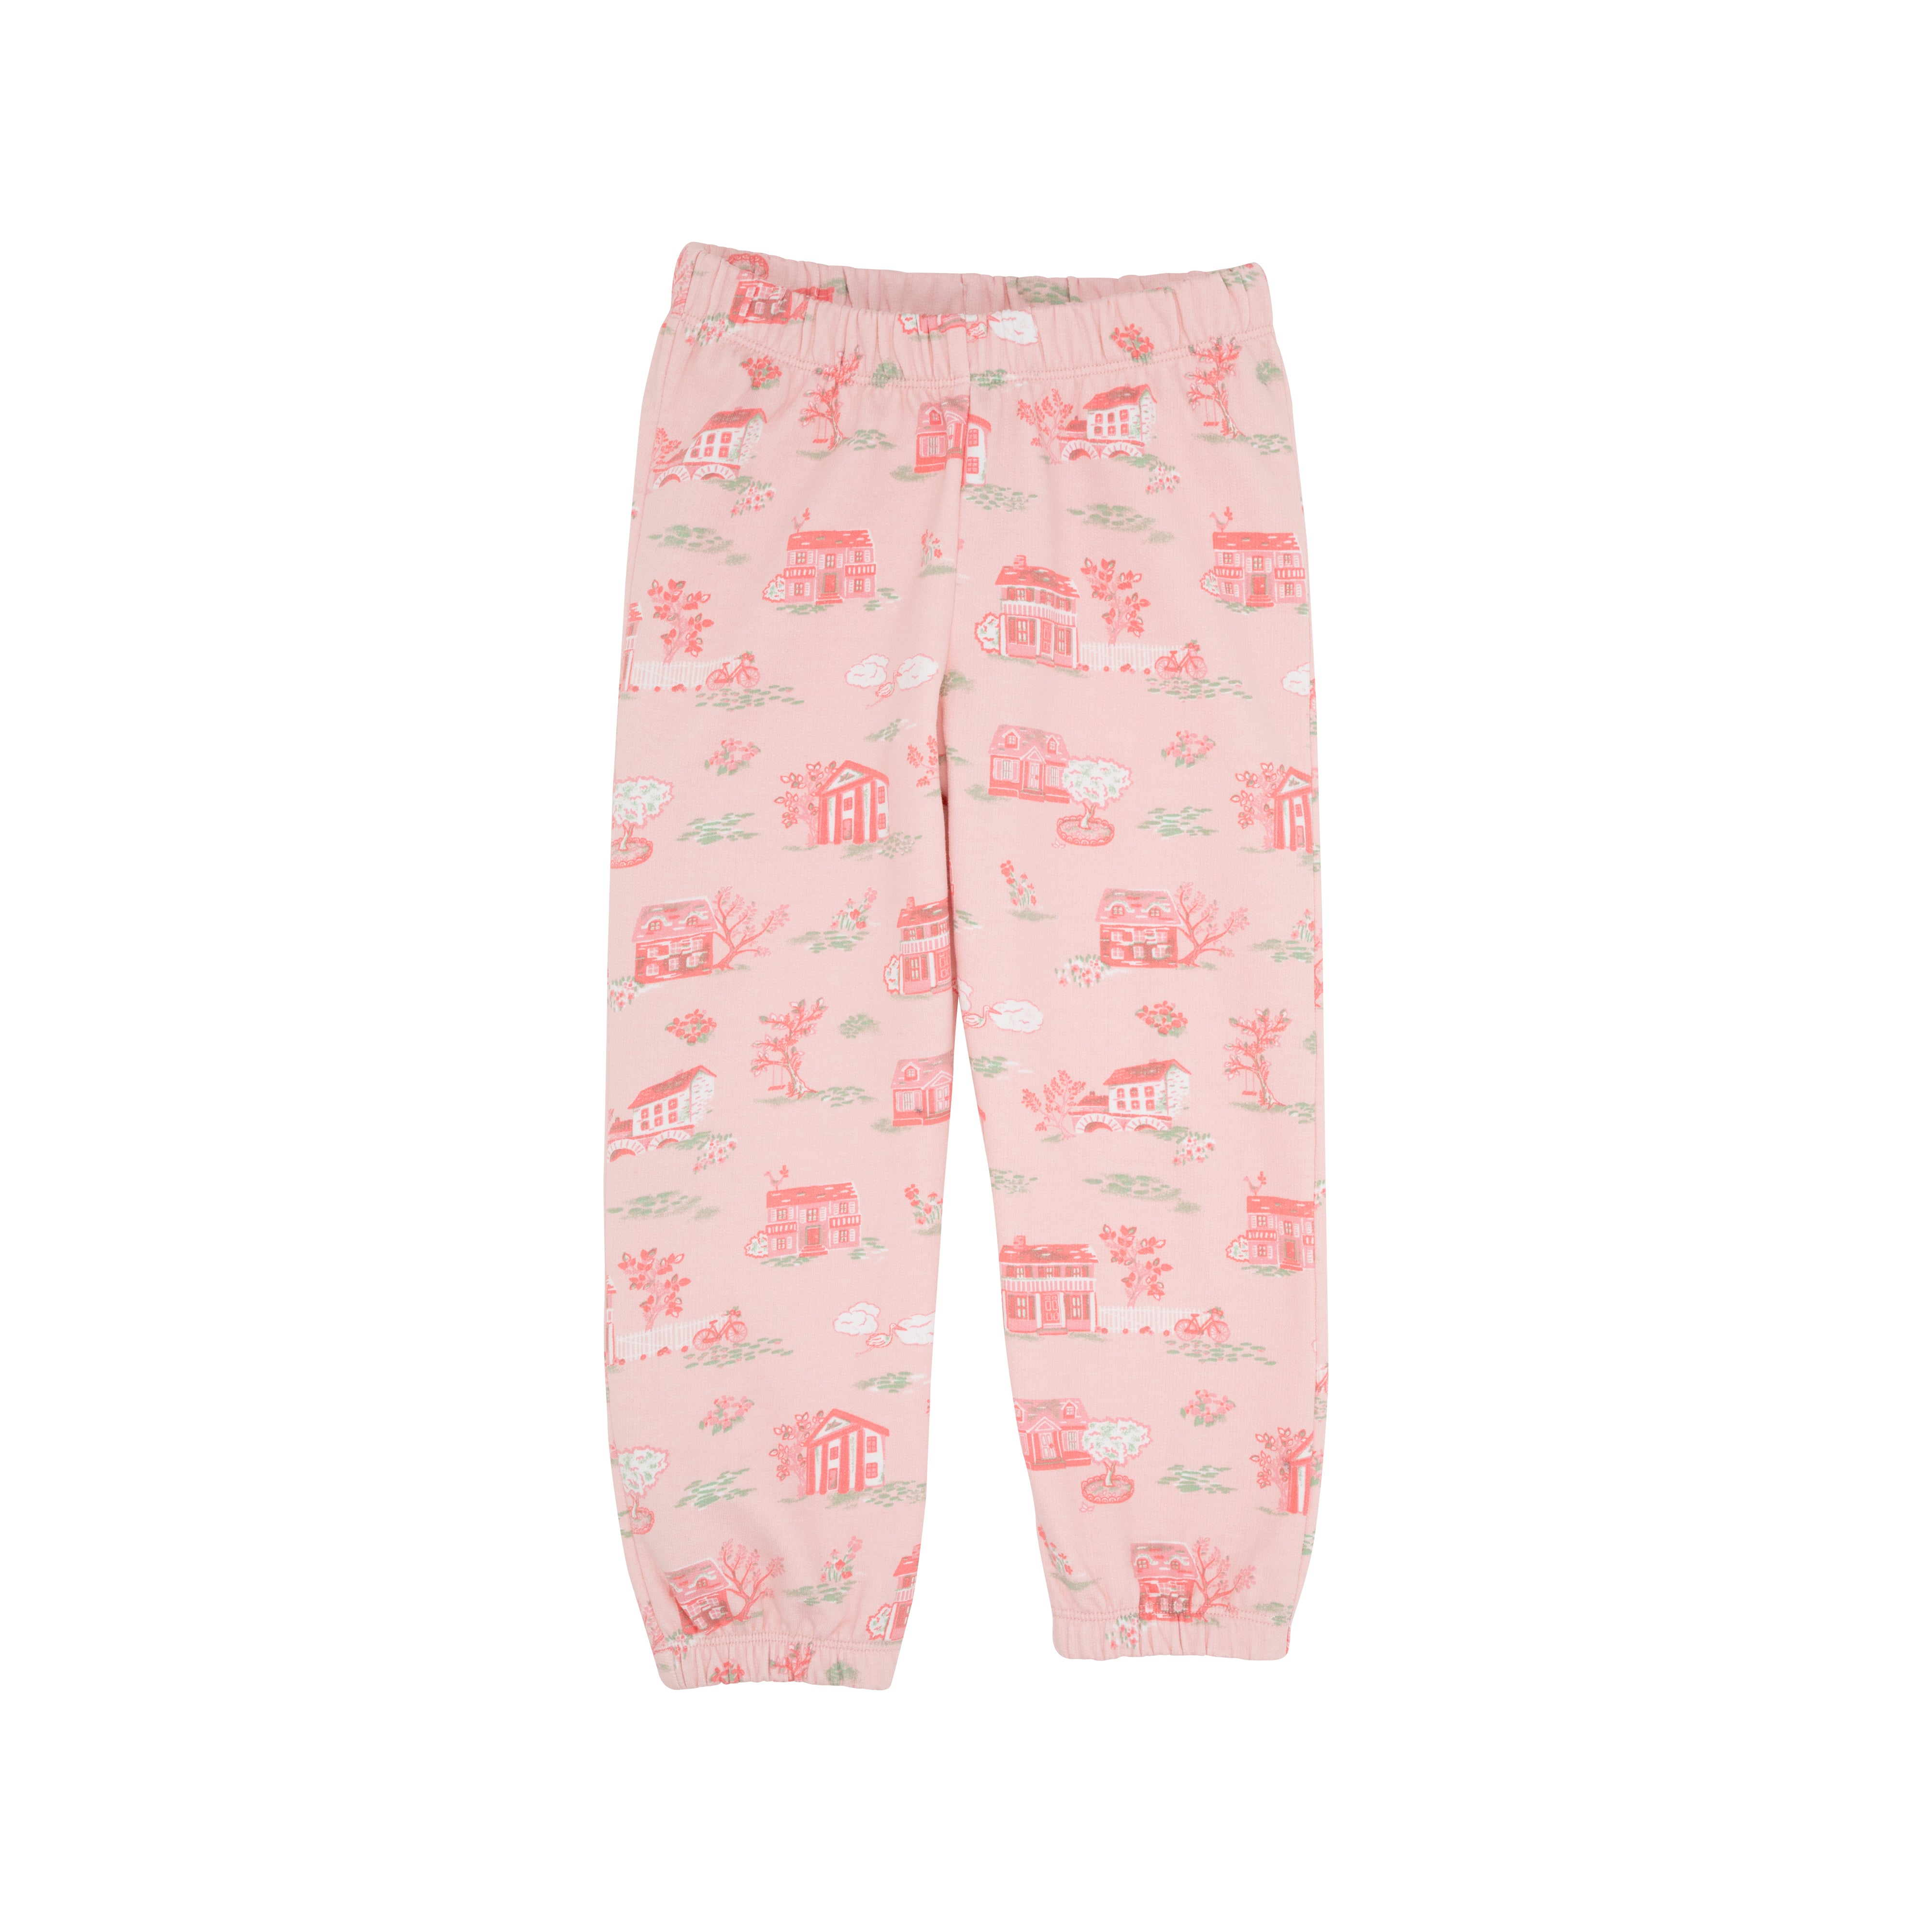 Gates Sweeney Sweatpants - Towne and Toile – The Beaufort Bonnet Company